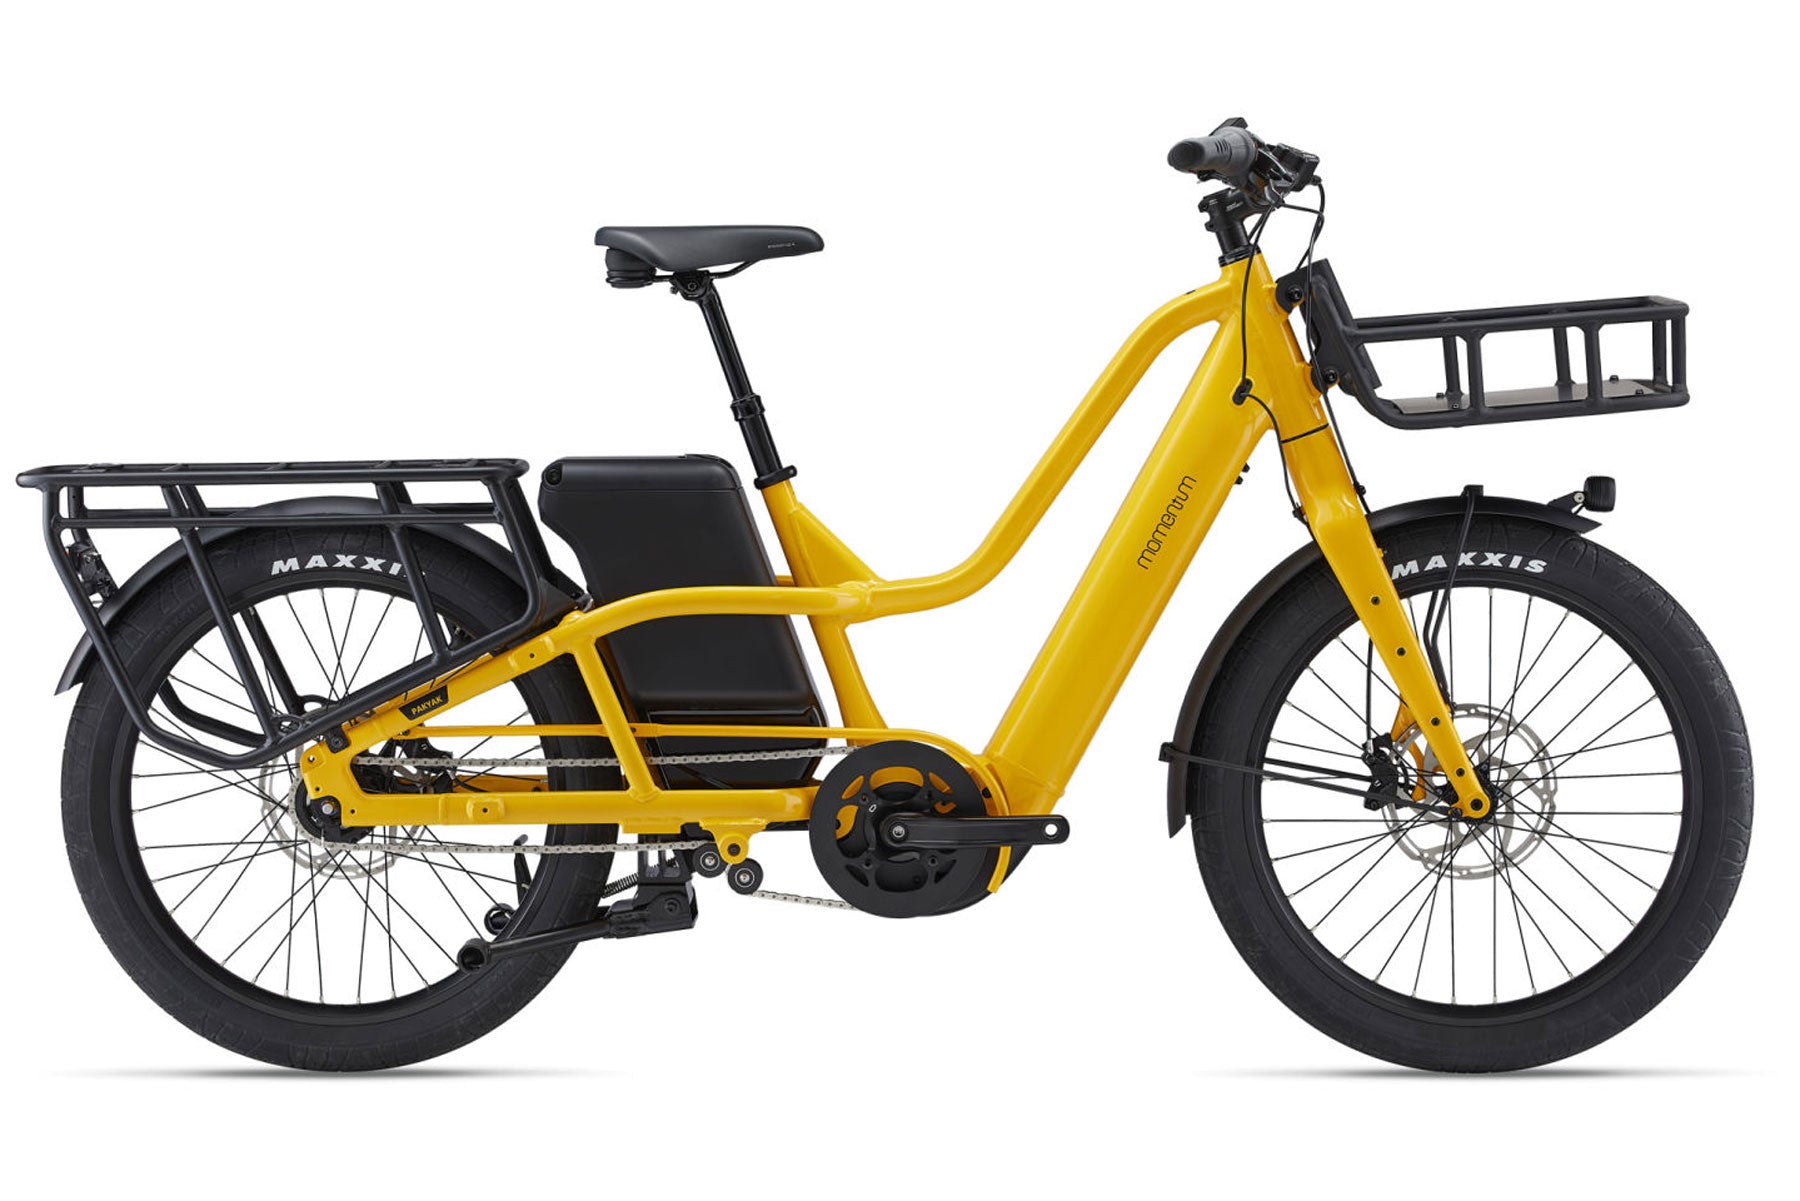 10 Best Electric Cargo Bikes in 2023 to Carry Heavy Loads